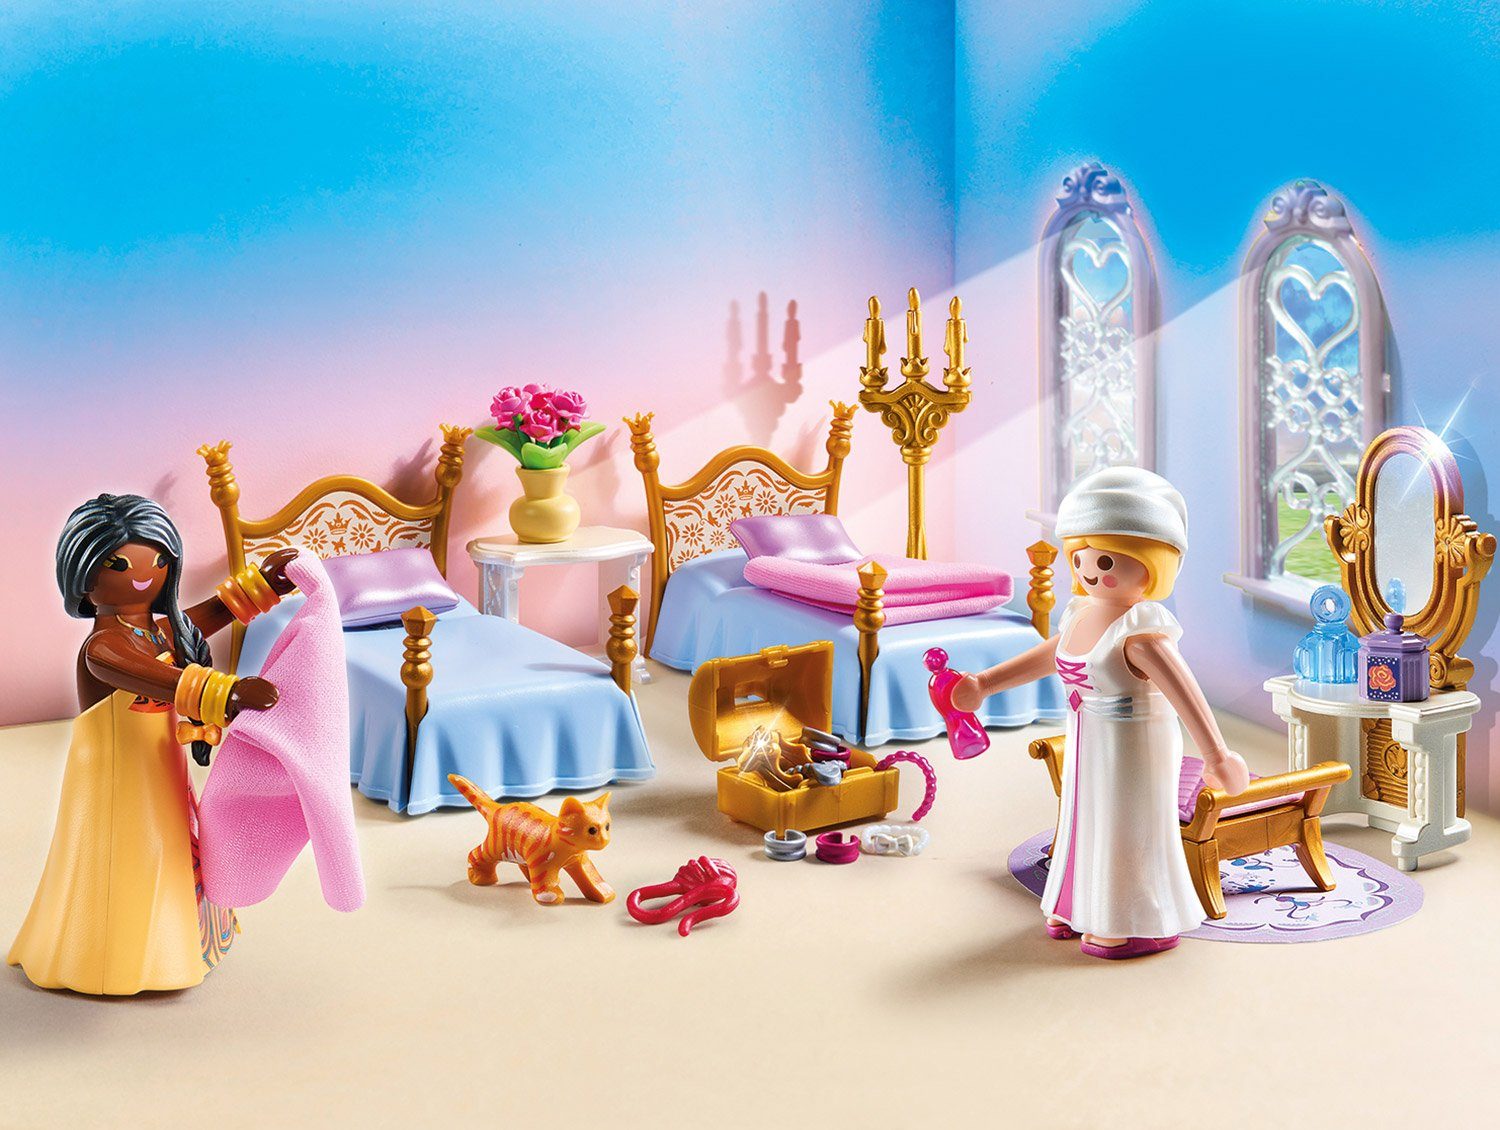 Playmobil® Konstruktions-Spielset Made (70453), Schlafsaal Germany Princess, (73 in St)